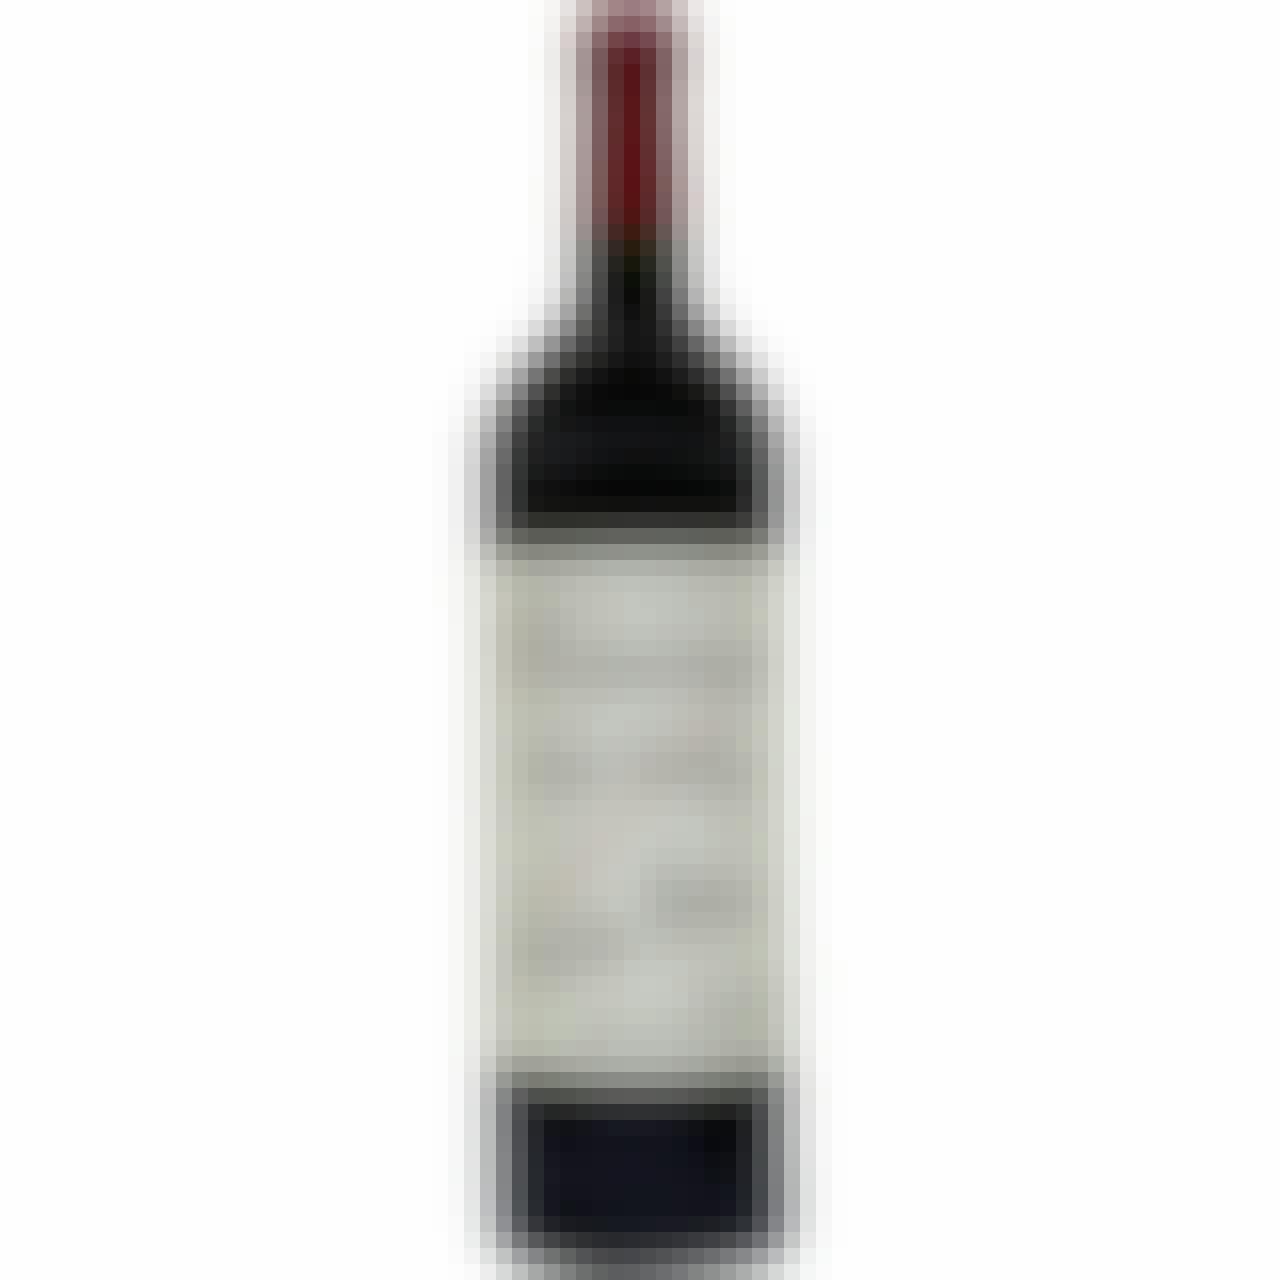 Dominus Napa Valley Red 2019 750ml